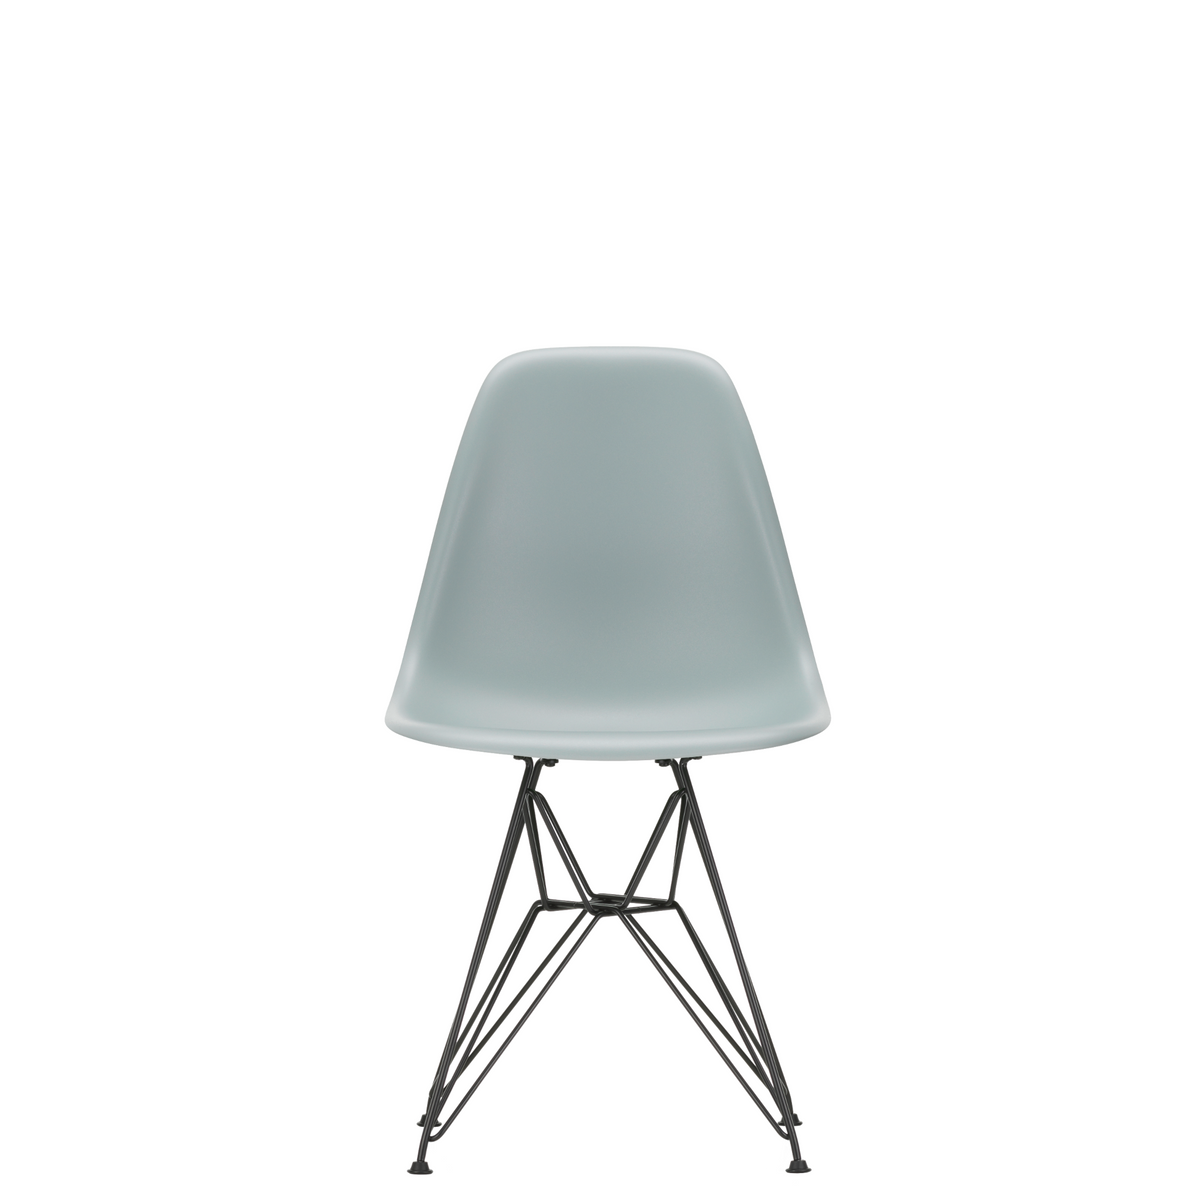 Vitra Eames Plastic Side Chair DSR Powder Coated for Outdoor Use Light Grey Shell Black Powdercoated Base